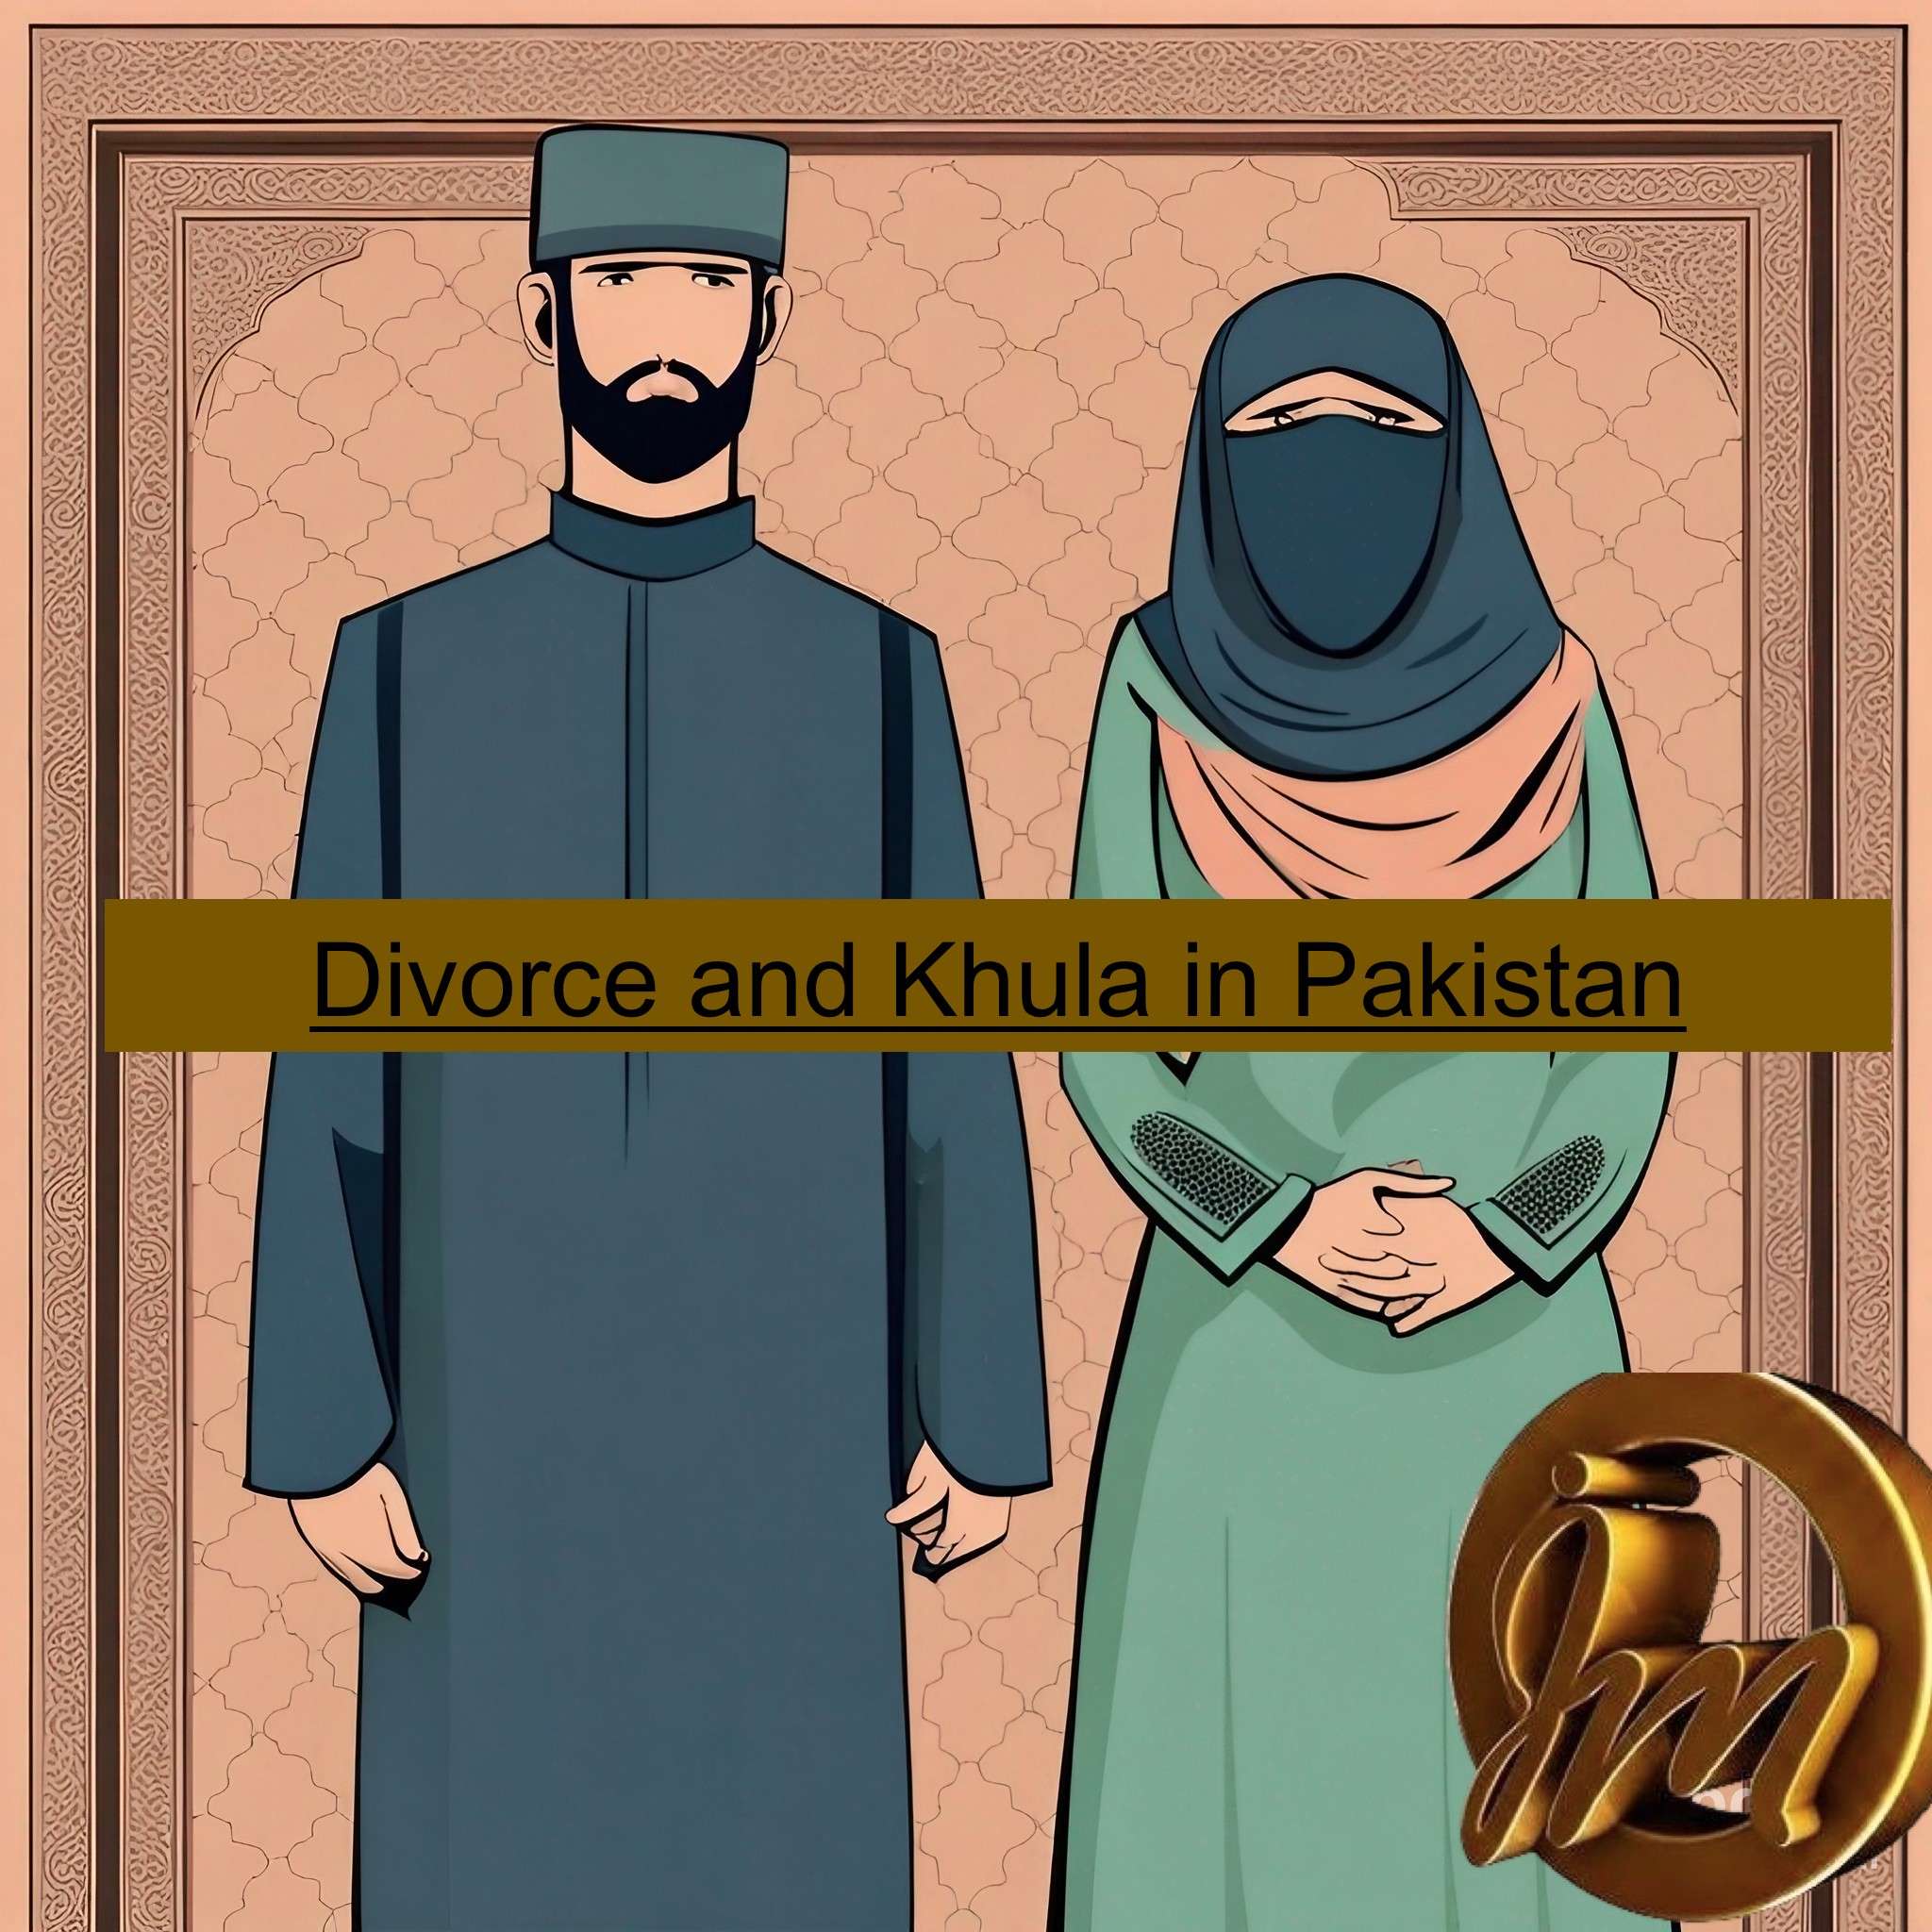 Khula and Divorce in Pakistan